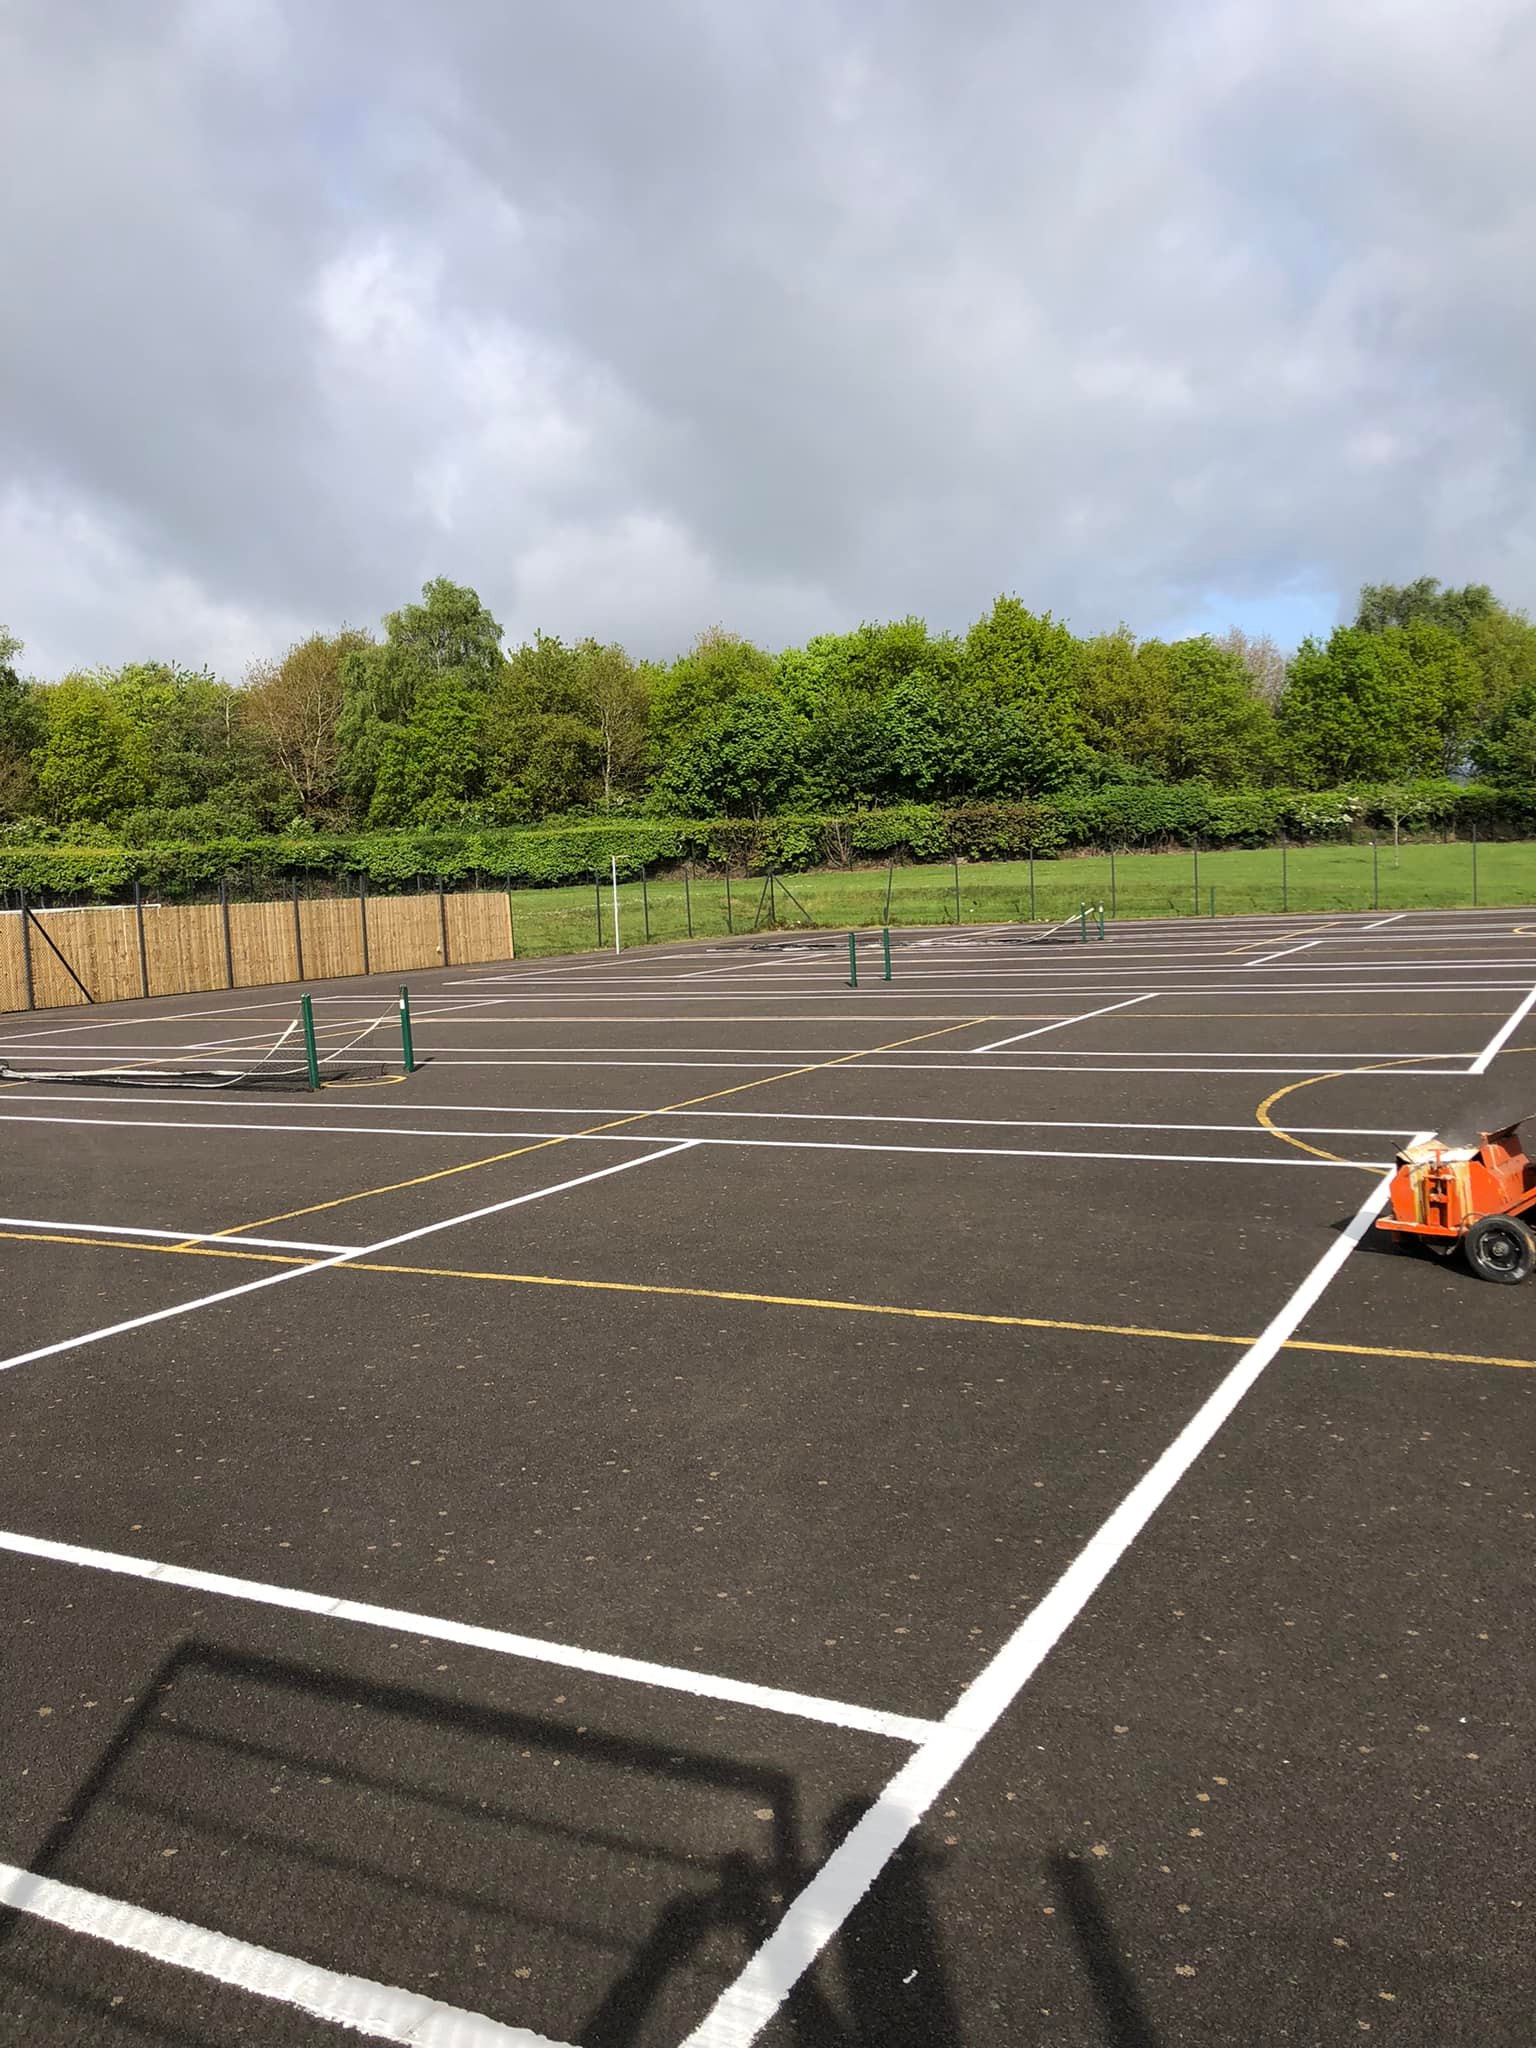 Tennis courts, rounders, and netball courts for thornhill school in derry